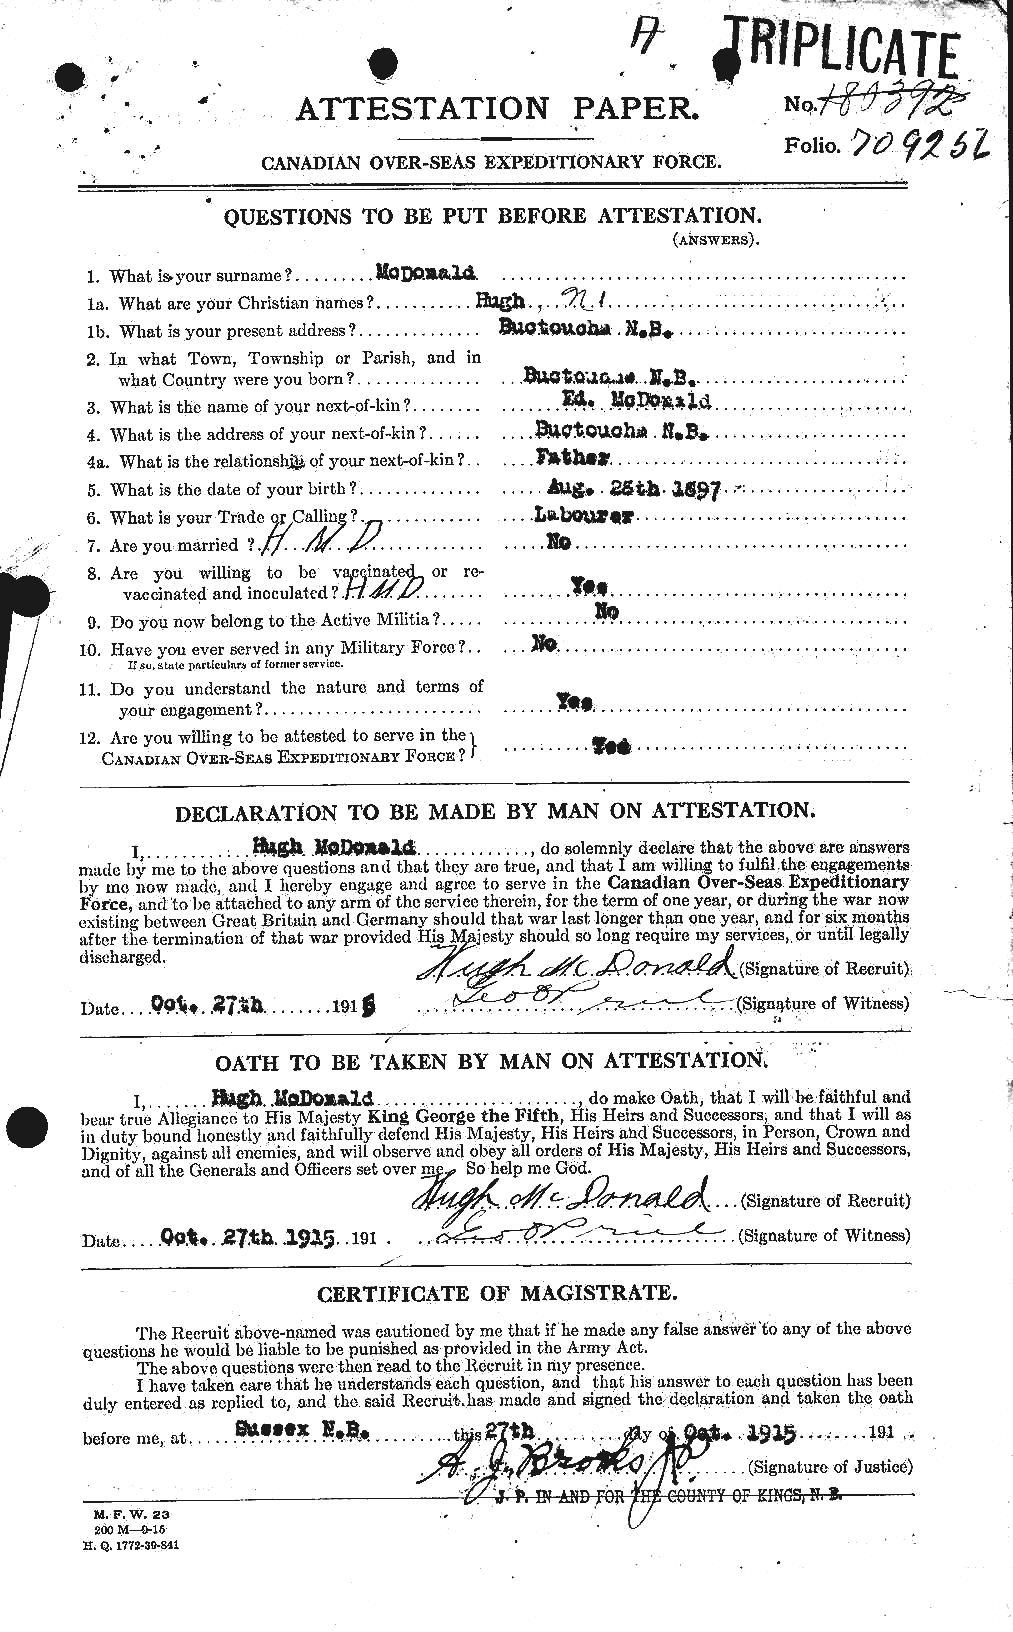 Personnel Records of the First World War - CEF 519100a